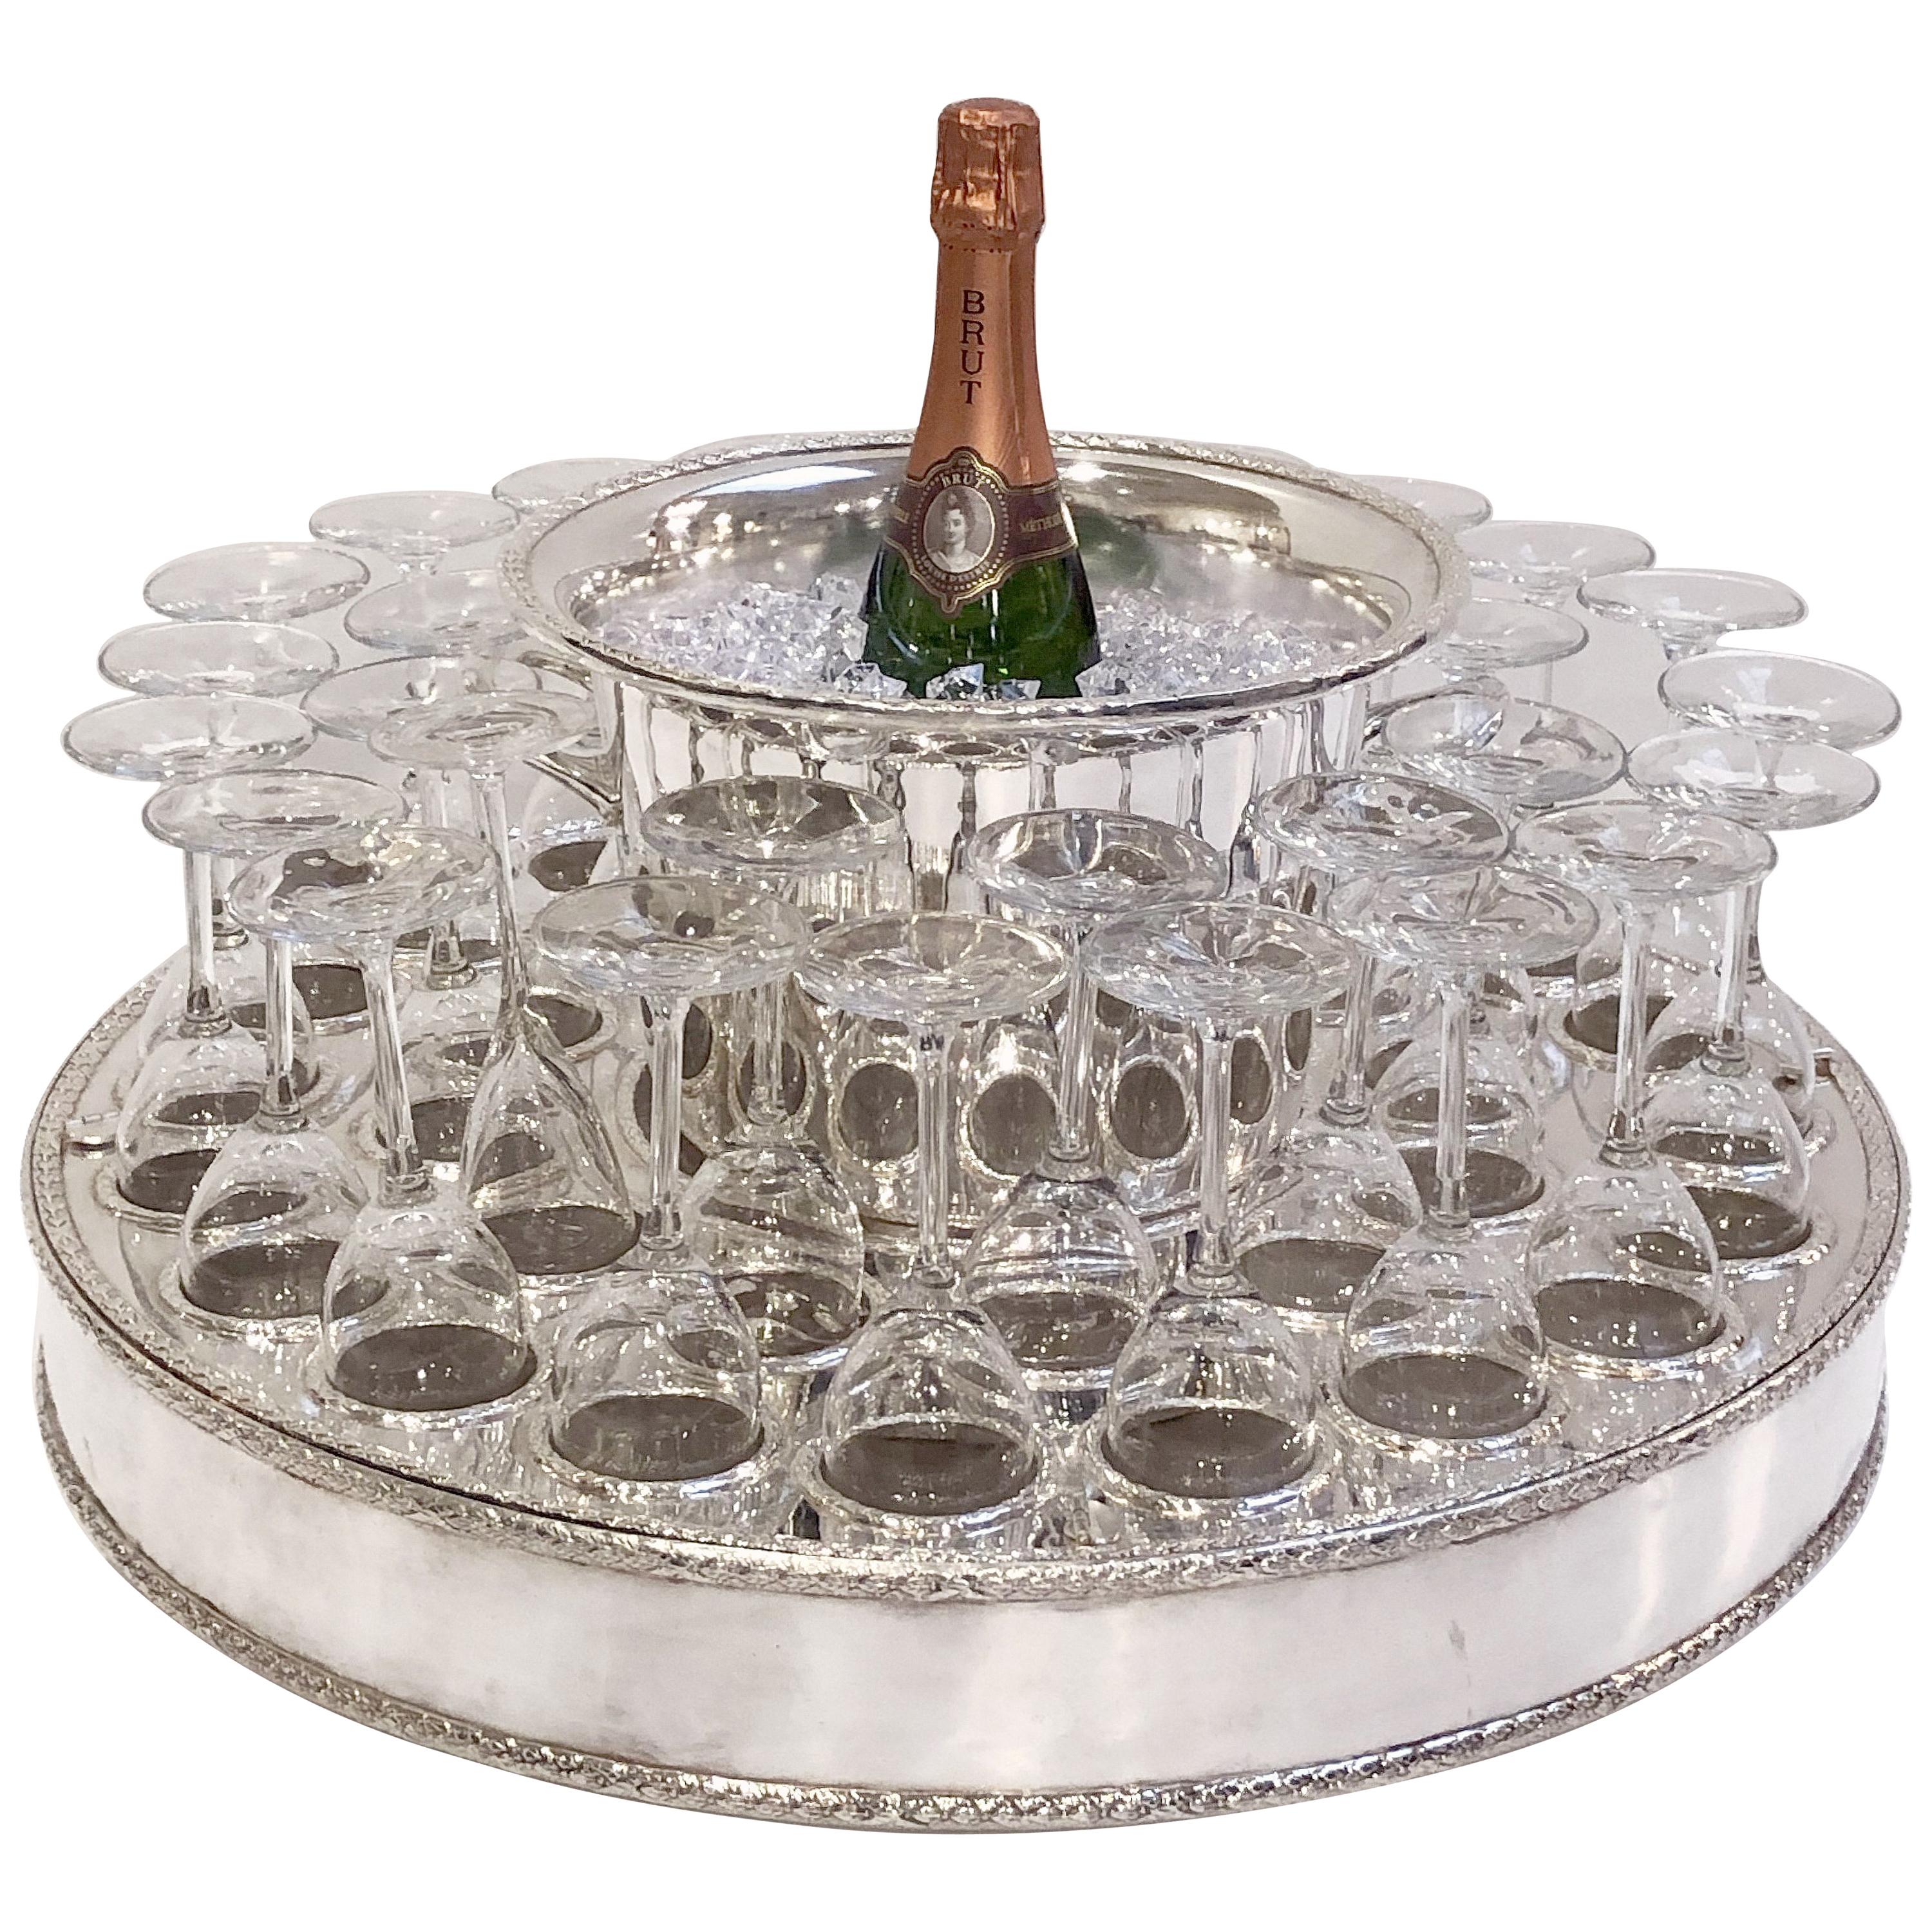 Italian Silver Champagne Service with Revolving Stand, Wine Cooler, and Glasses